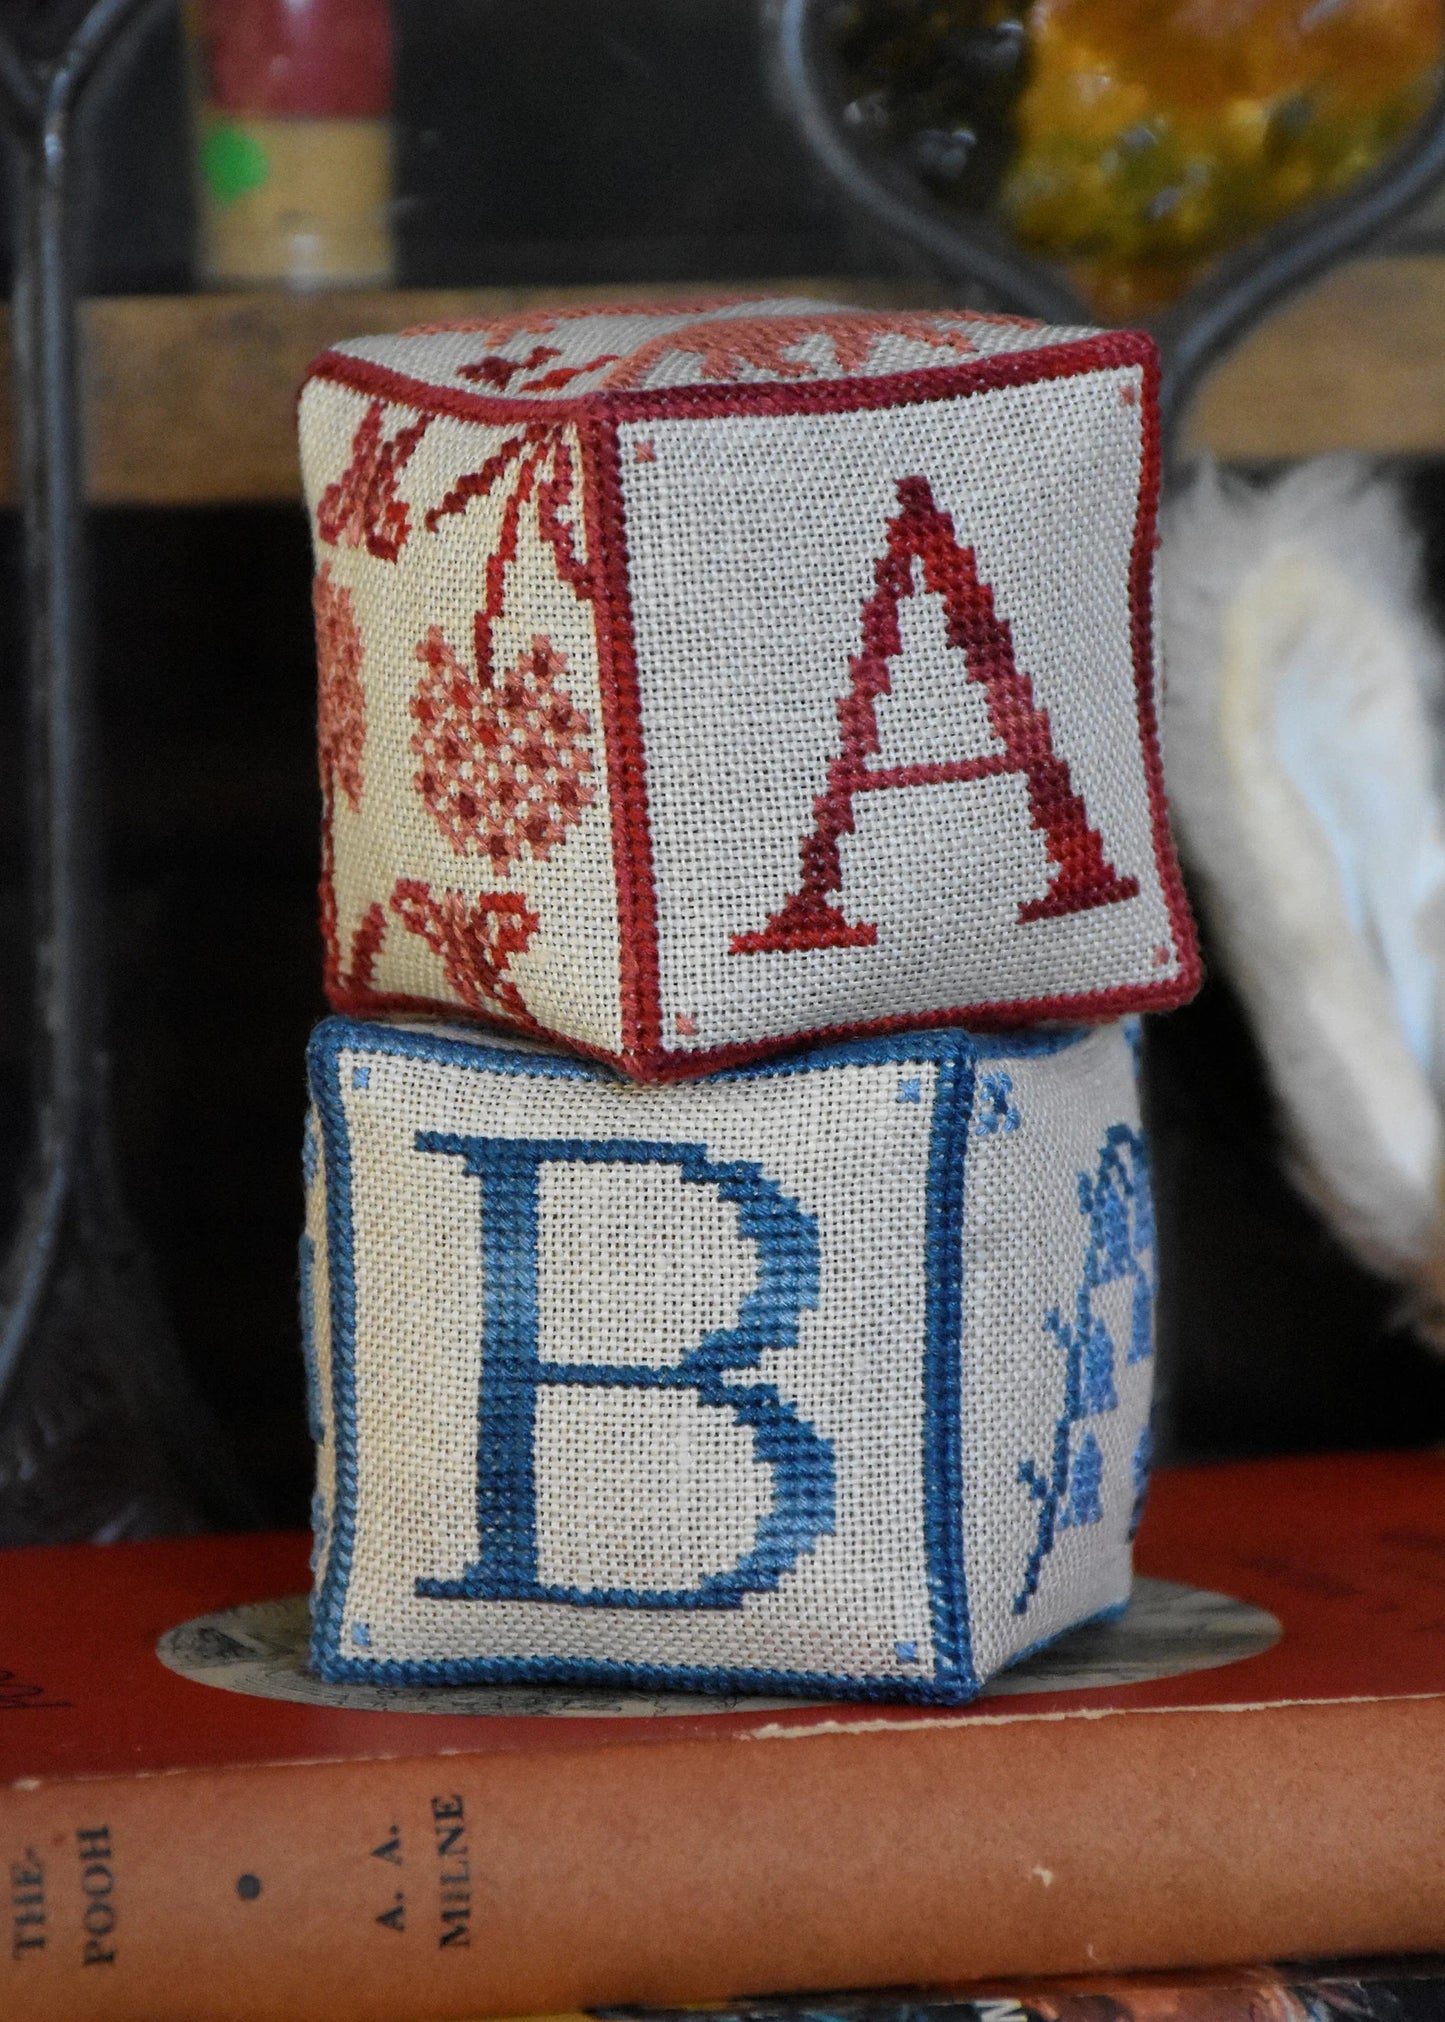 A is for Aardvark; B is for Balloon Cross Stitch Pattern Mojo Stitches